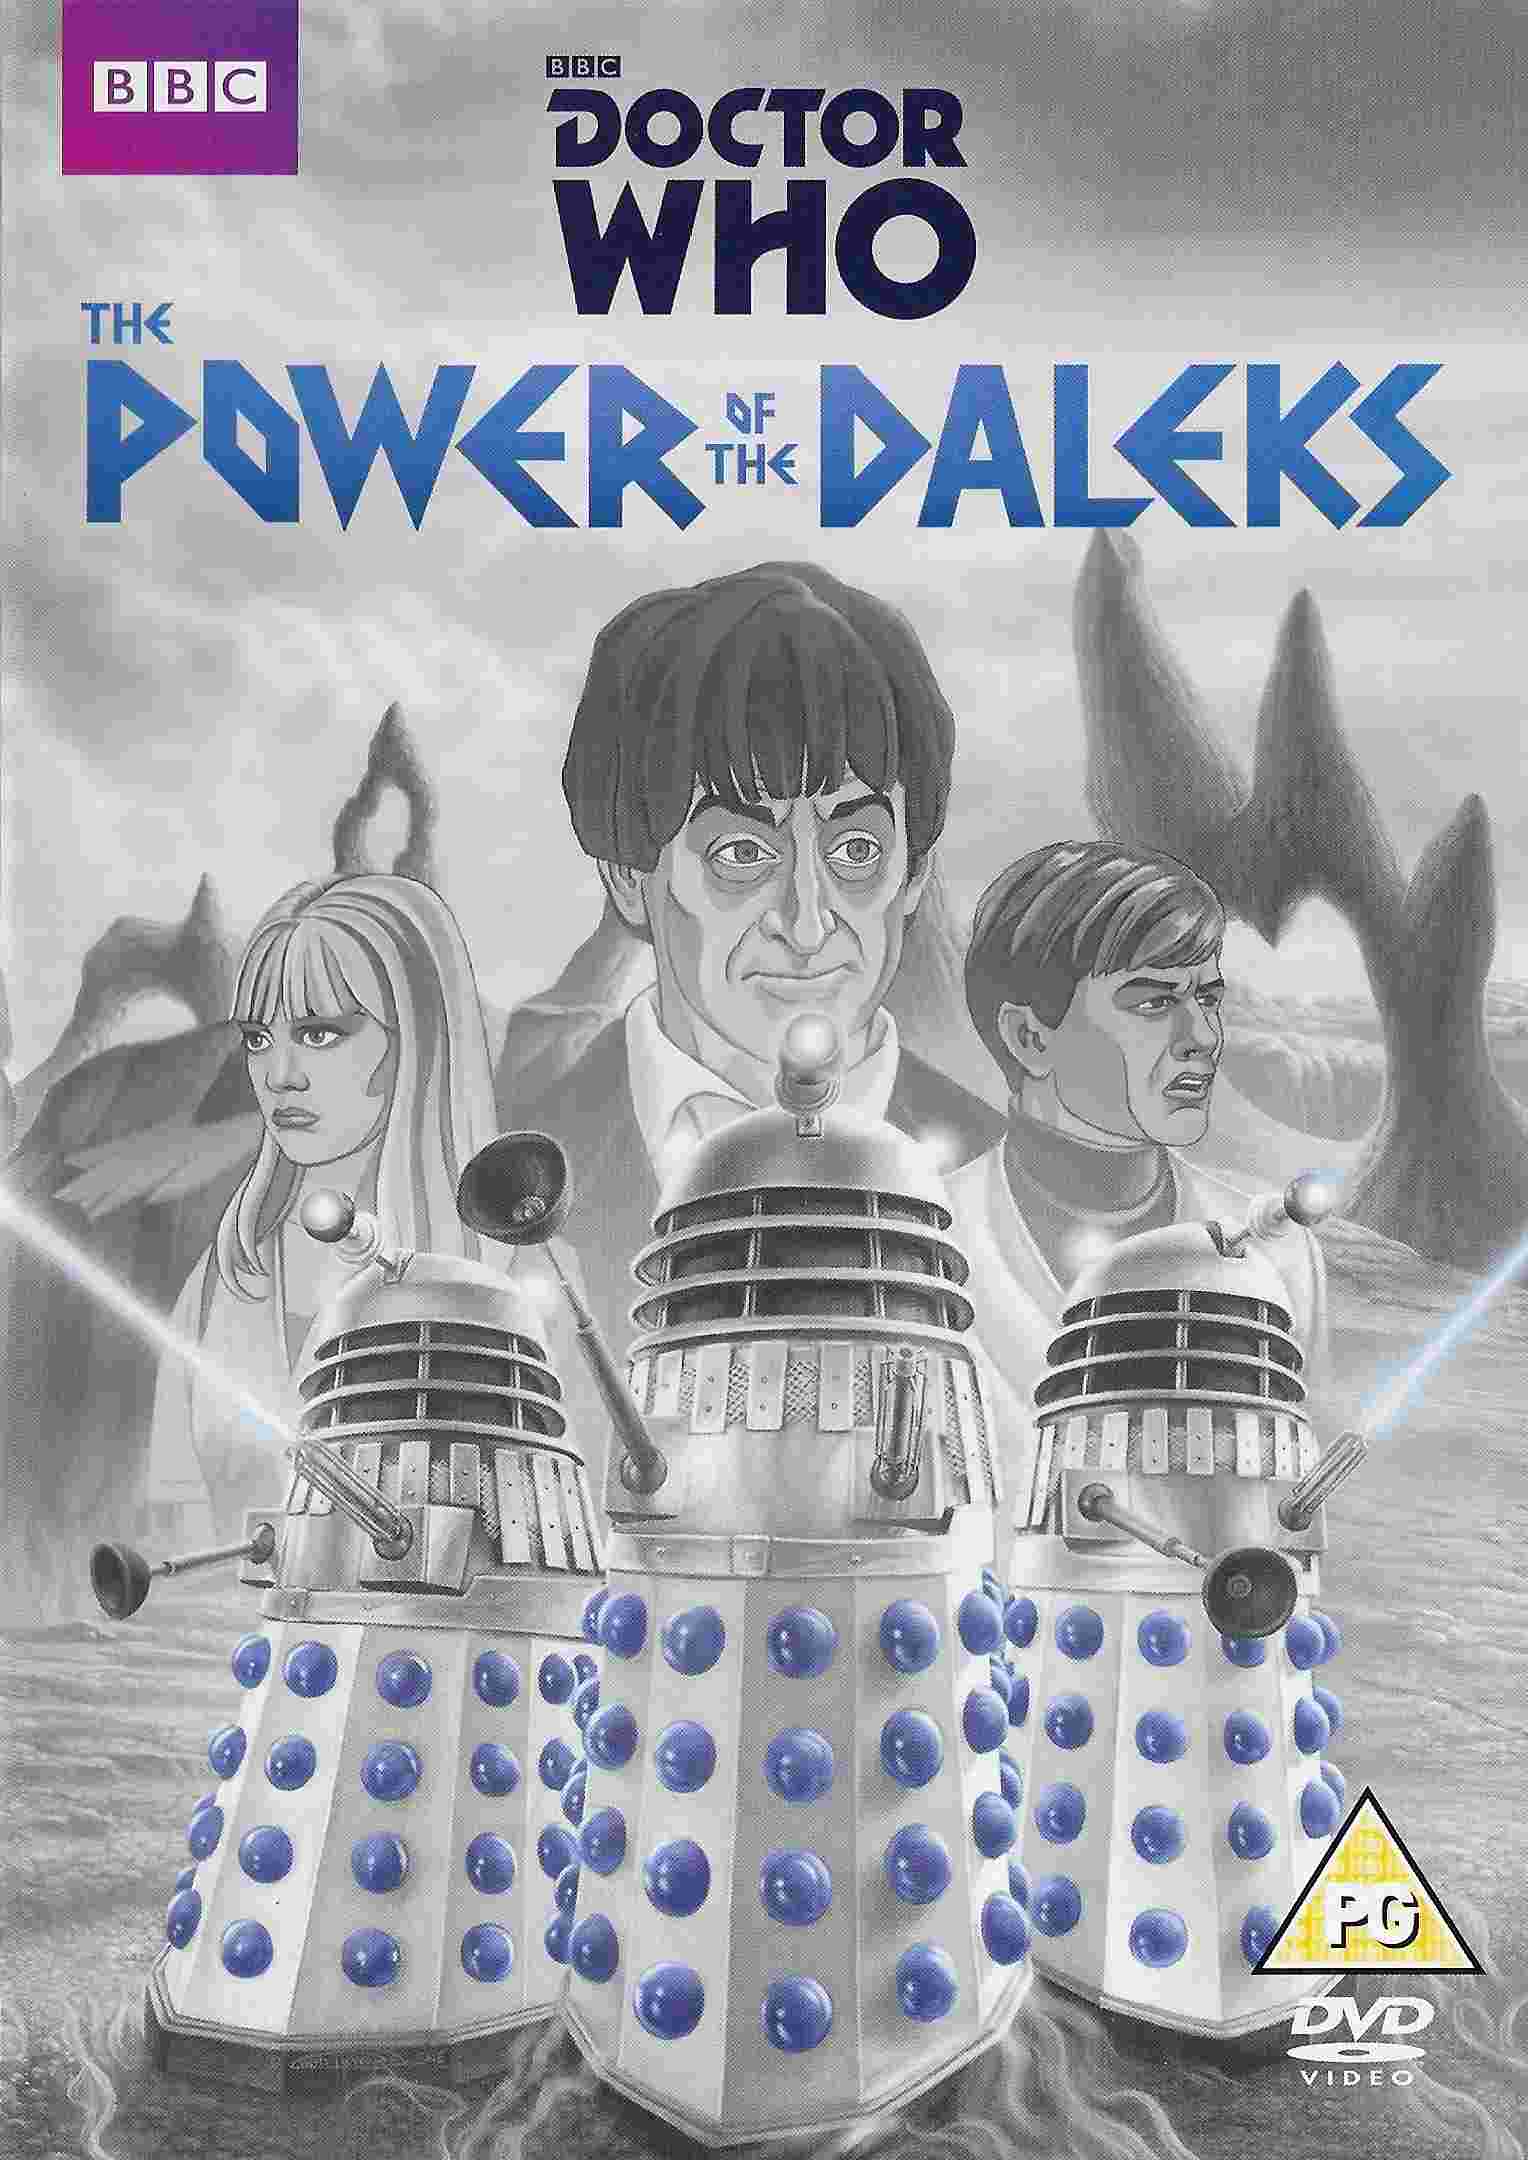 Picture of BBCDVD 4163 Doctor Who - The power of the Daleks by artist David Whitaker / Dennis Spooner from the BBC records and Tapes library